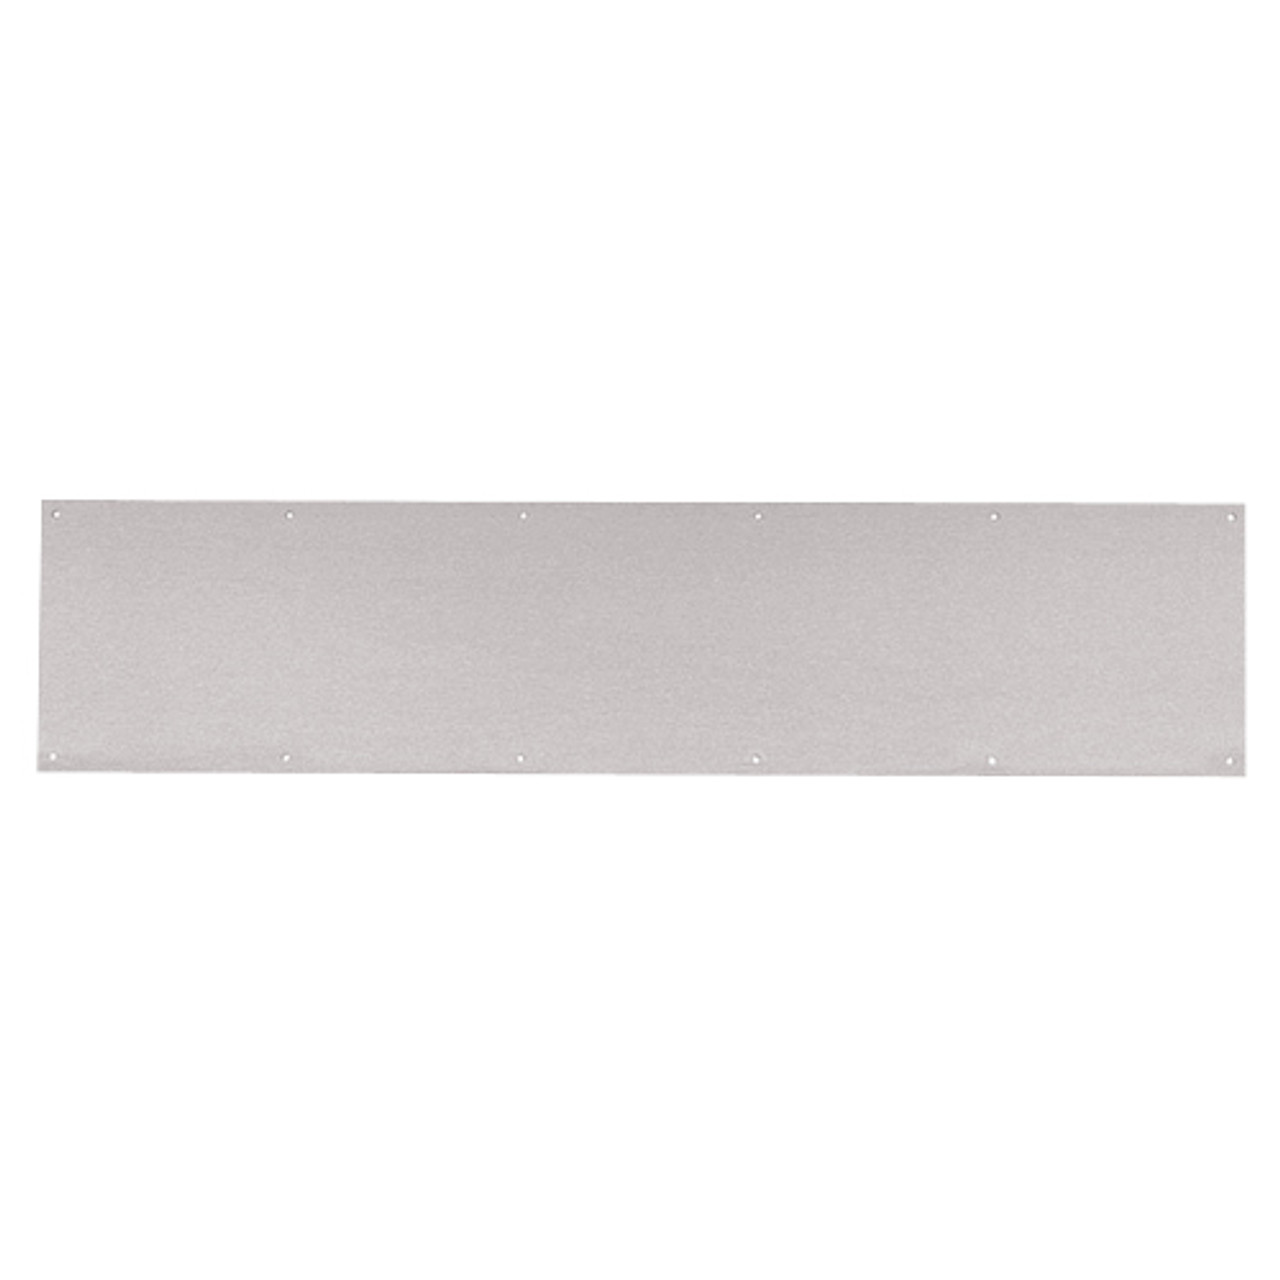 8400-US32D-30x28-B-CS Ives 8400 Series Protection Plate in Satin Stainless Steel